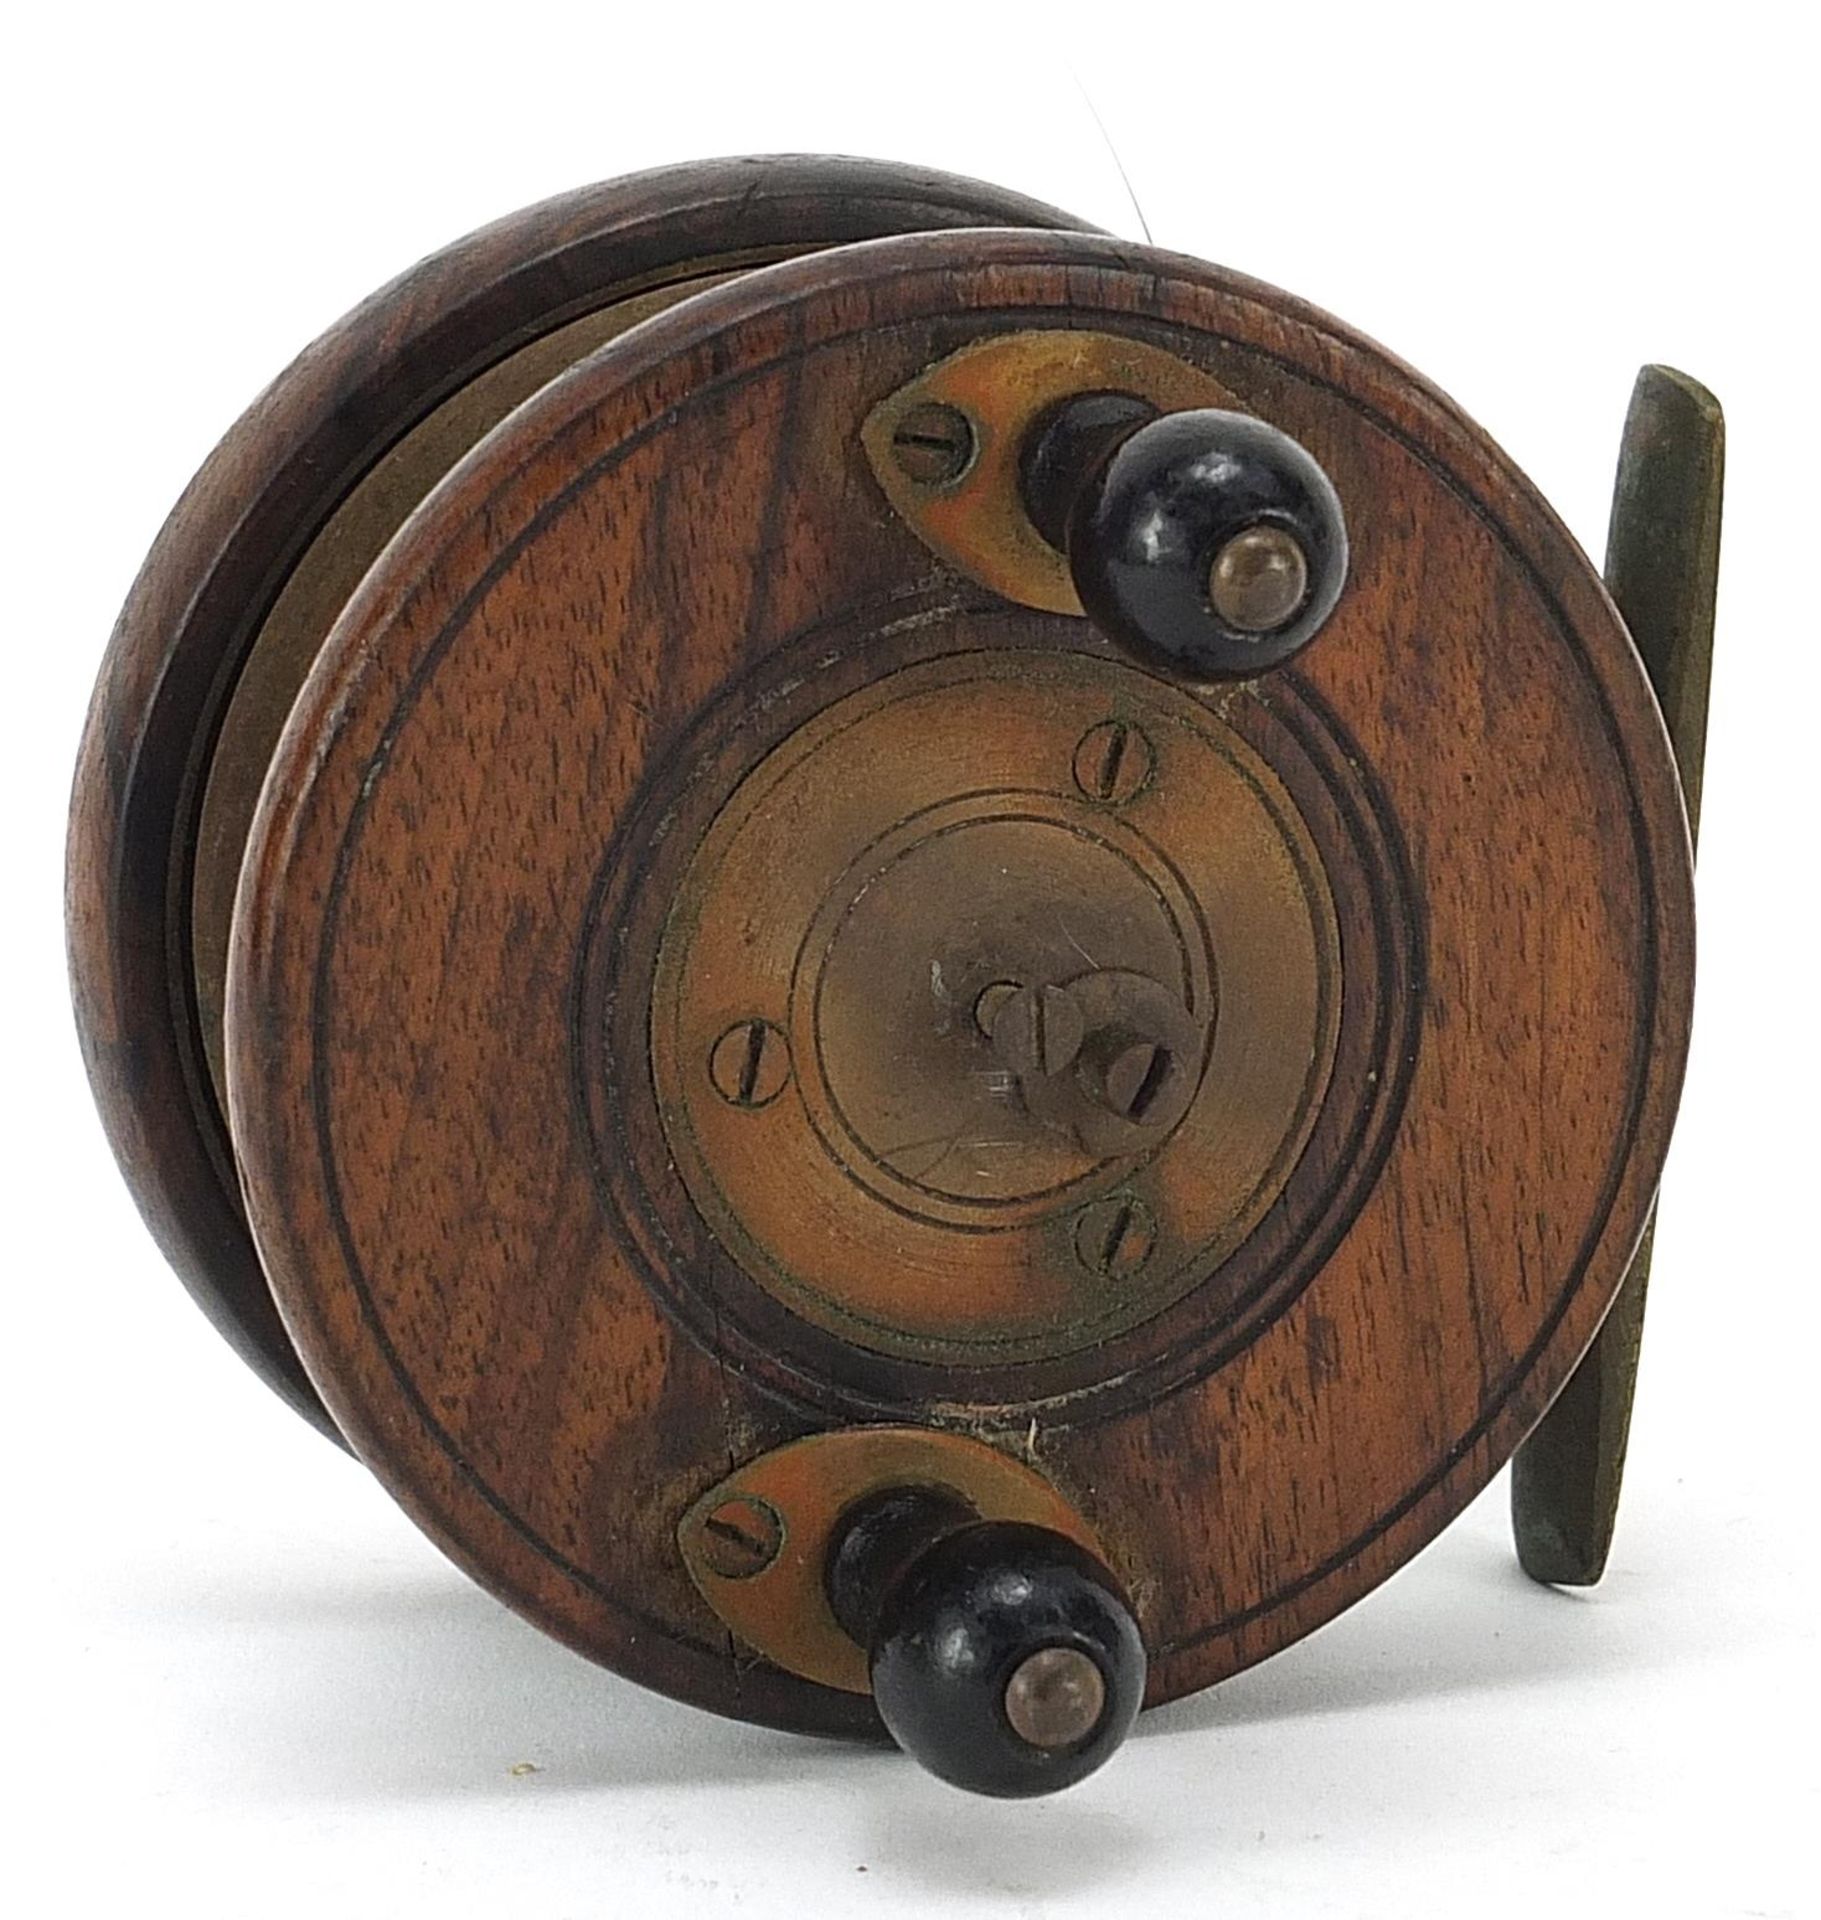 S Allcock, Victorian brass mounted 3.5 inch fishing reel